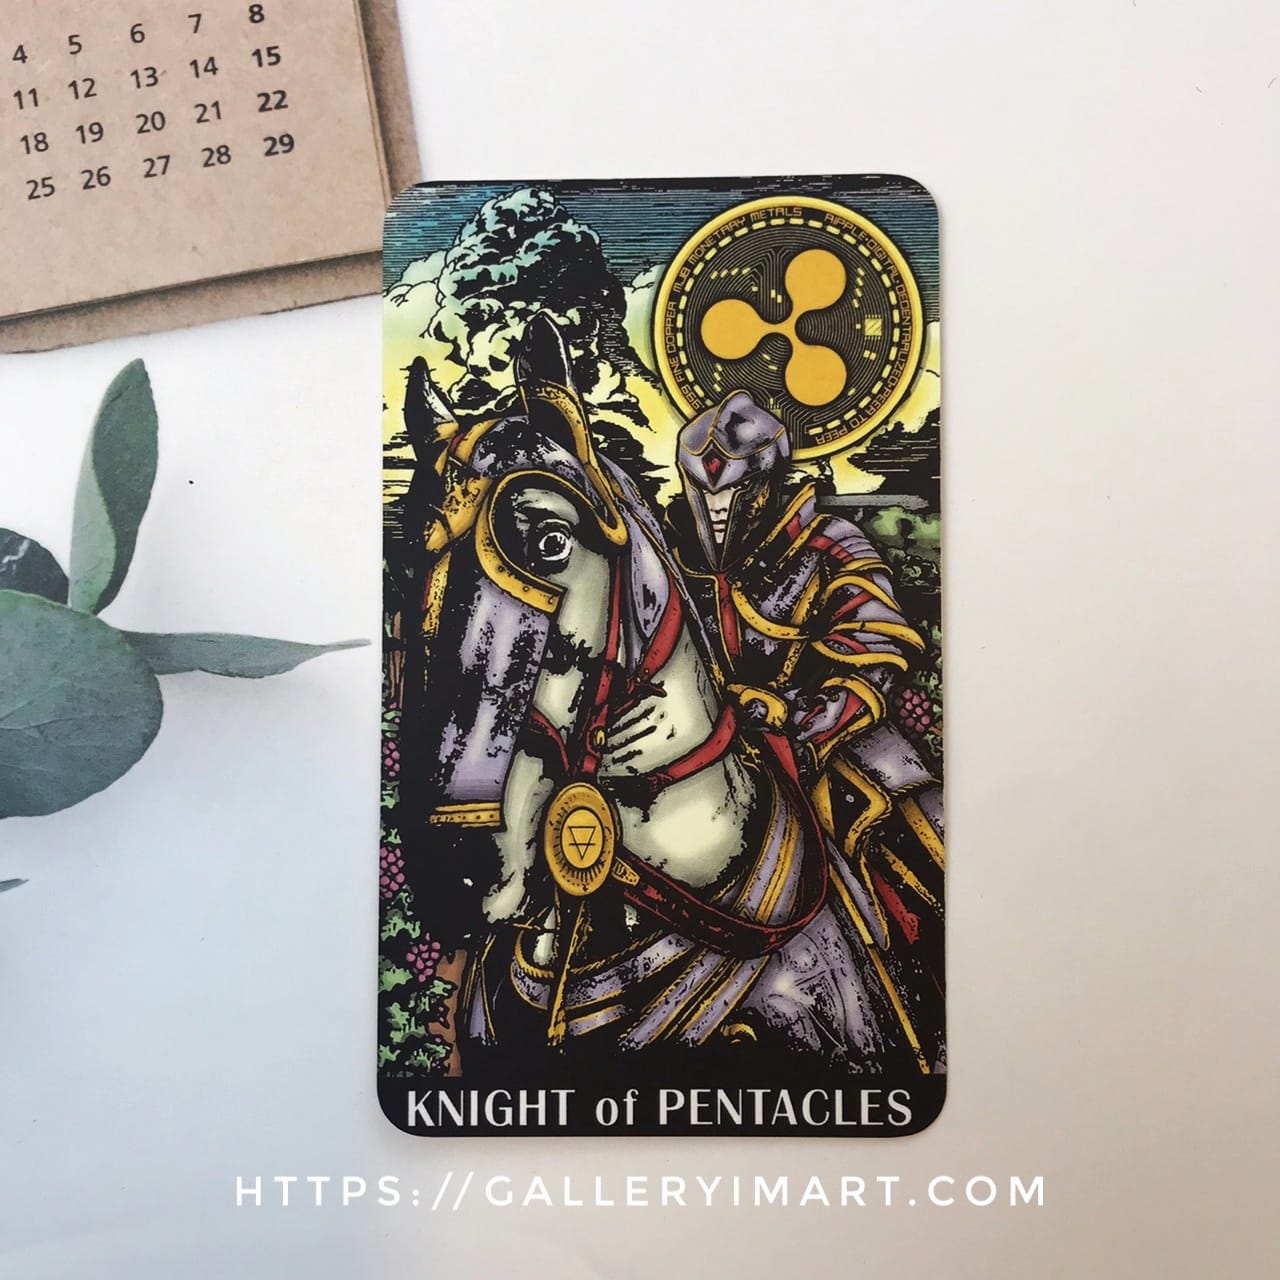 Knight of Pentacles Meaning